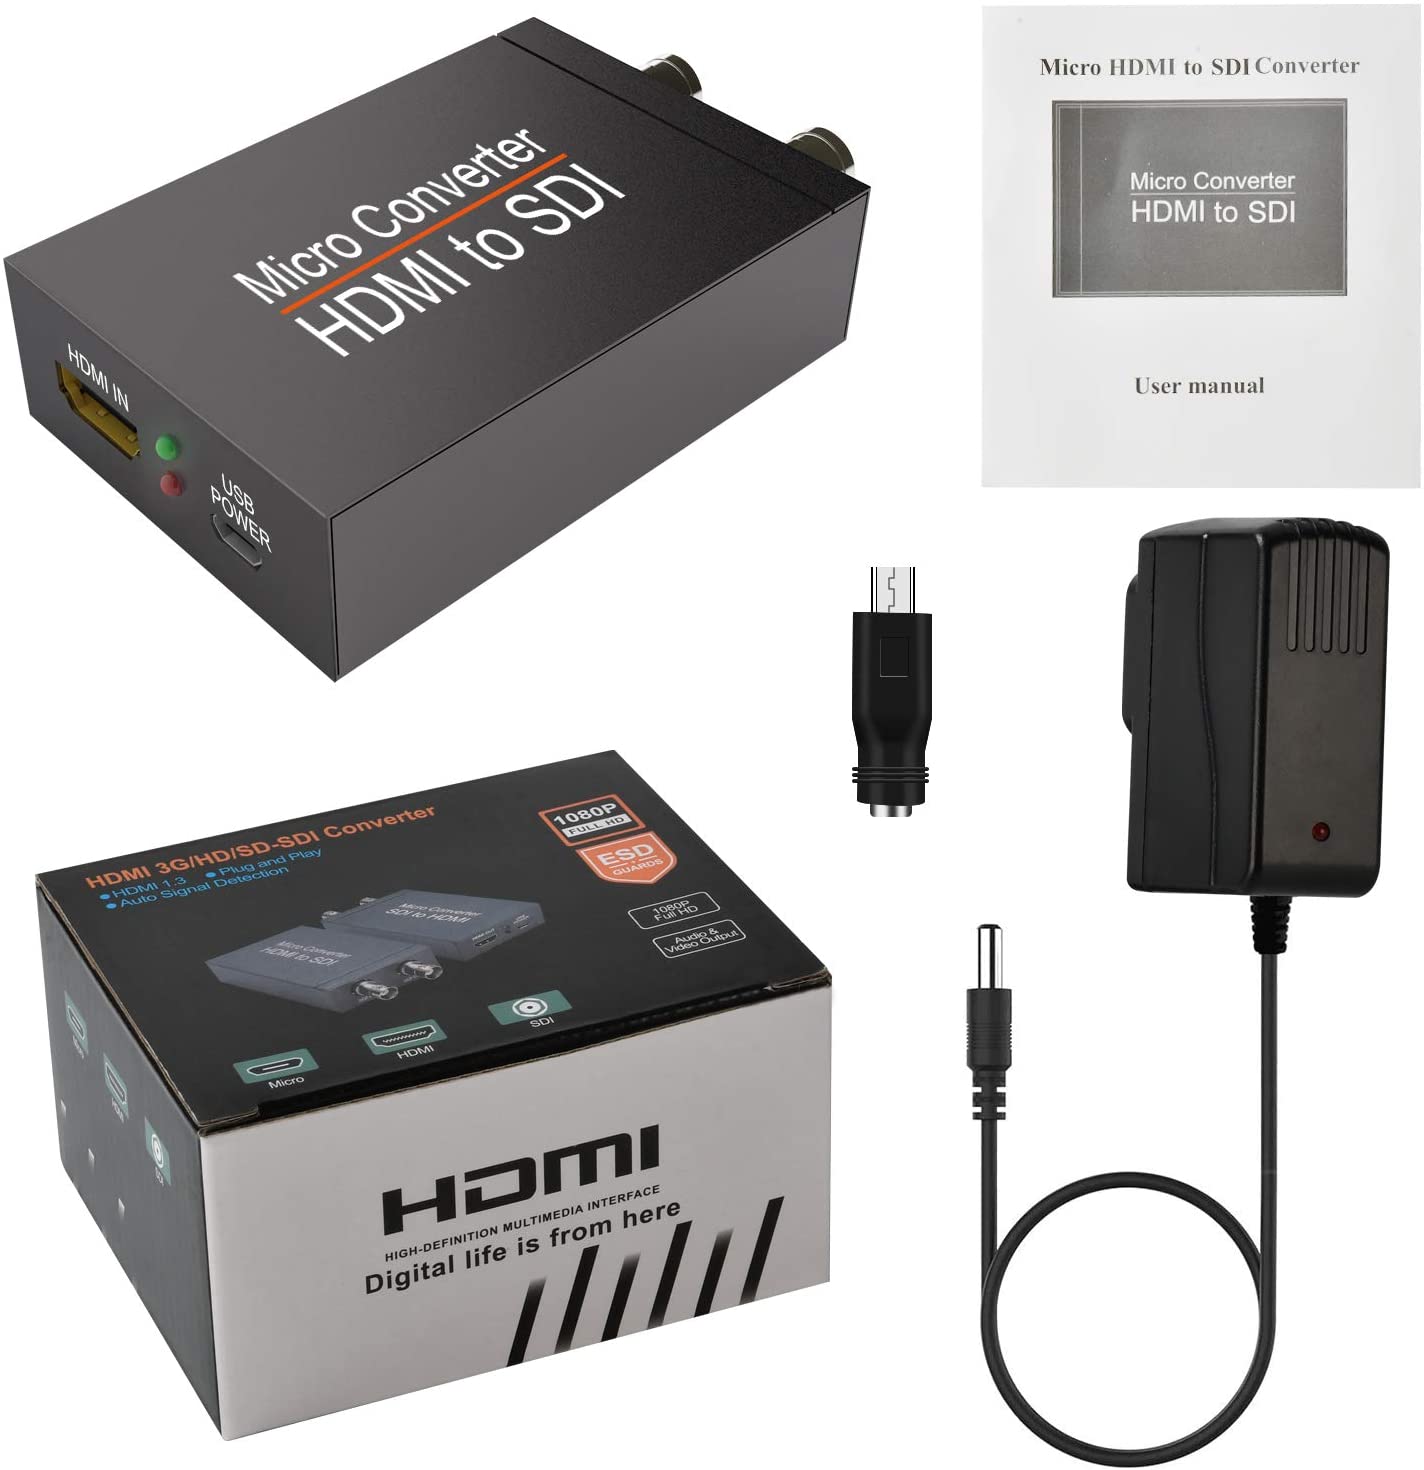 Rybozen HDMI to SDI Converter Power Supply Adapter Included, Micro Converter 1 HDMI in 2 SDI out , Audio Format Detection, High Bit Rates at 2.970 Gbit/s